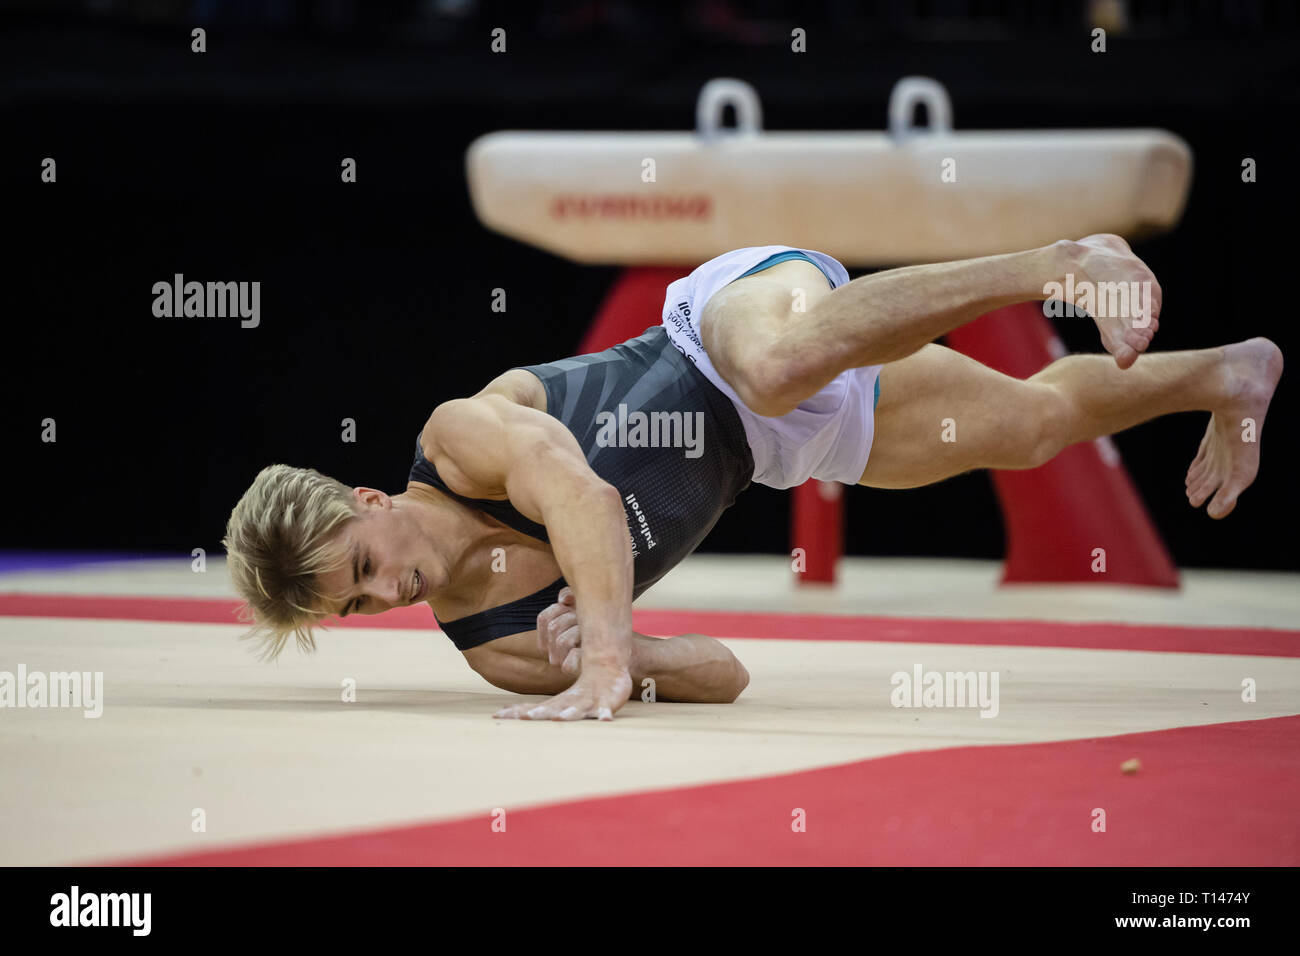 London, UK. 23rd March, 2019. Jay Thompson performs on Floor Exercise during the Matchroom Multisport presents the 2019 Superstars of Gymnastics at The O2 Arena on Saturday, 23 March 2019. LONDON ENGLAND. Credit: Taka G Wu/Alamy News Stock Photo